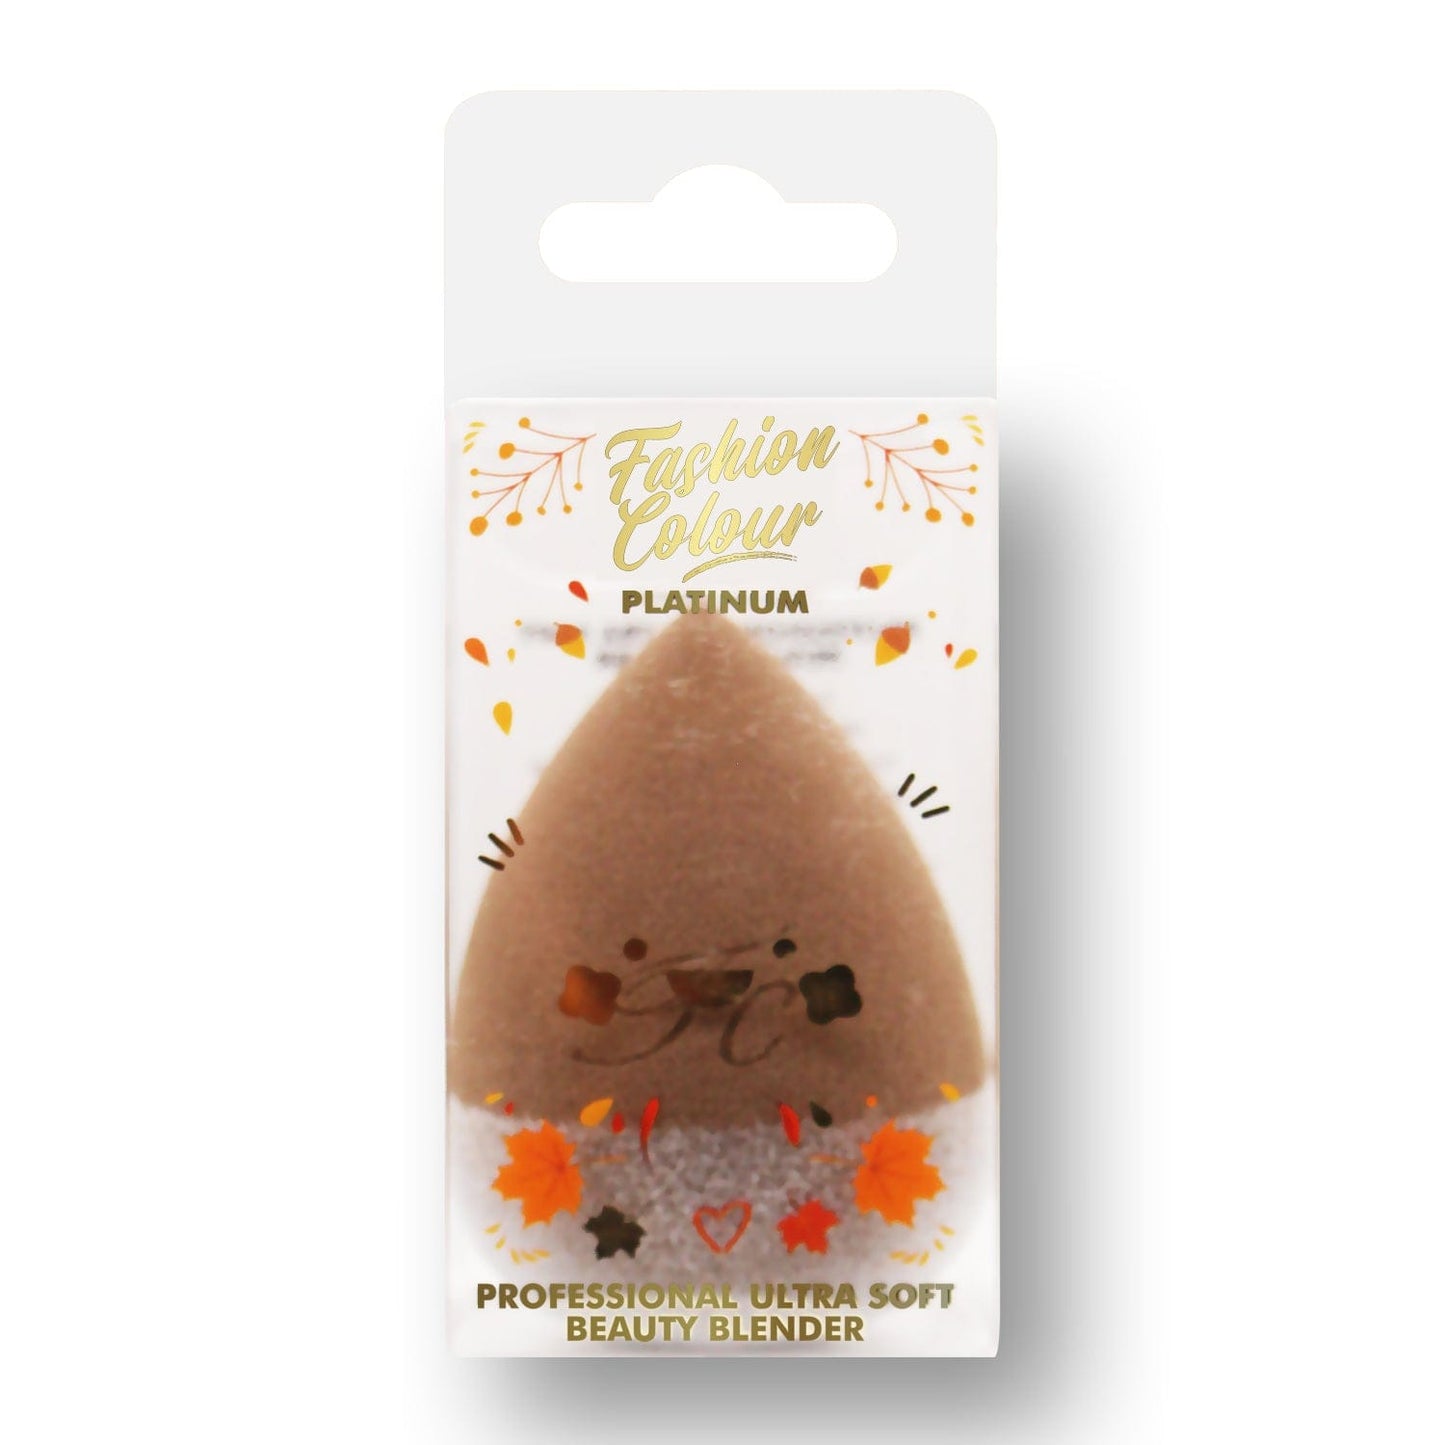 Fashion Colour beauty blender is soft, light, fluffy, squishy and porous. It gives an even blend without absorbing excess product. Its egg shape brown beauty blender is all type sensitive skin. It is own washable, re-usable, recyclable Etc. It increases its size when going wet can be used with both wet and dry product.